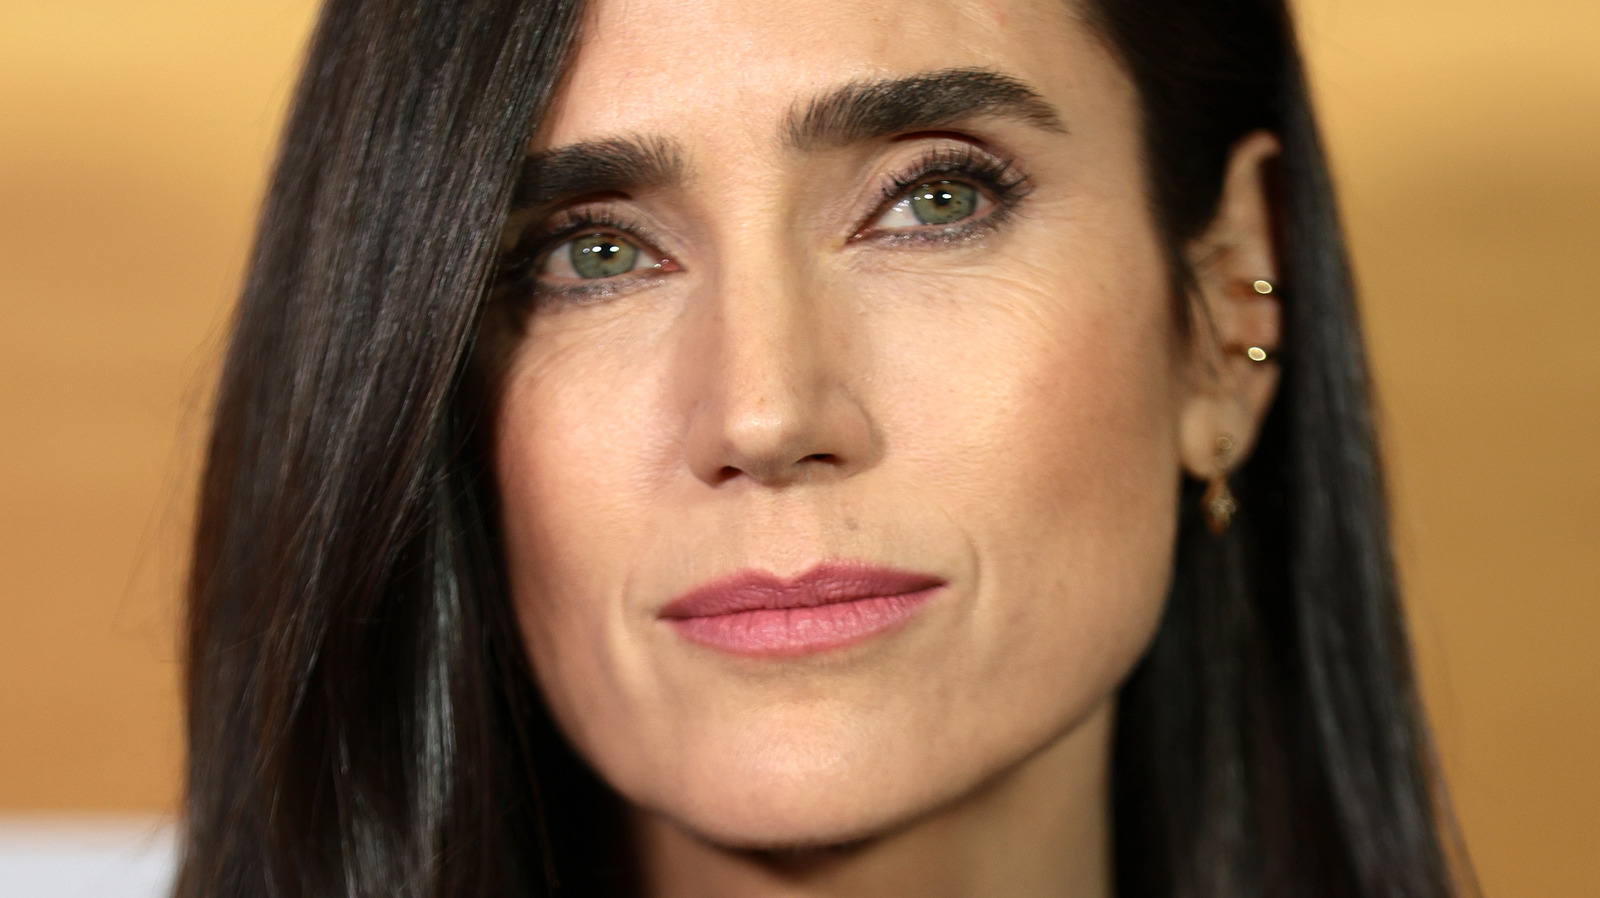 Jennifer Connelly - Movies, Biography, News, Age & Photos